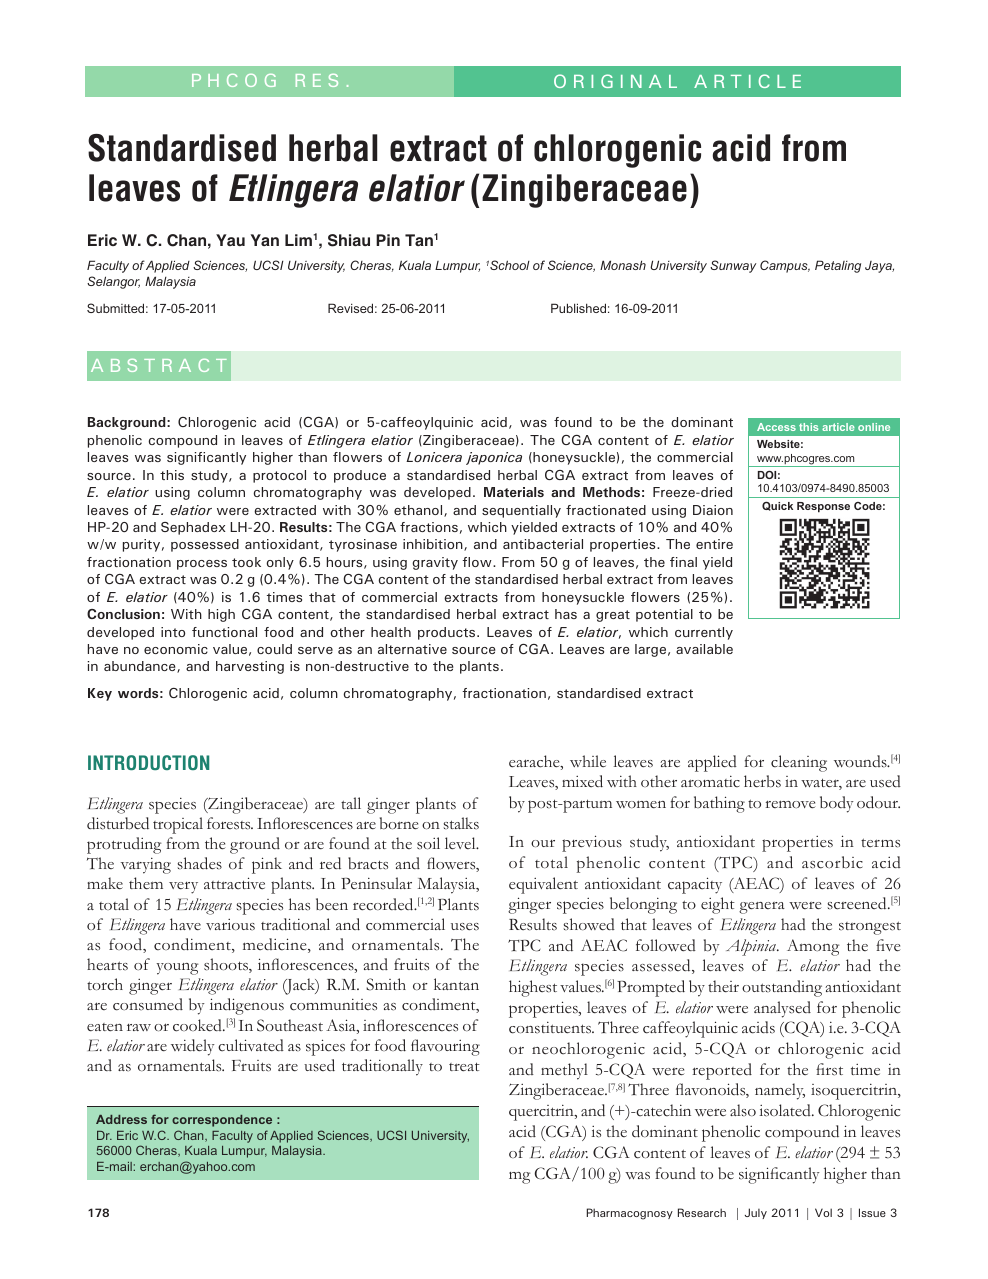 Standardised Herbal Extract Of Chlorogenic Acid From Leaves Of Etlingera Elatior Zingiberaceae Topic Of Research Paper In Biological Sciences Download Scholarly Article Pdf And Read For Free On Cyberleninka Open Science